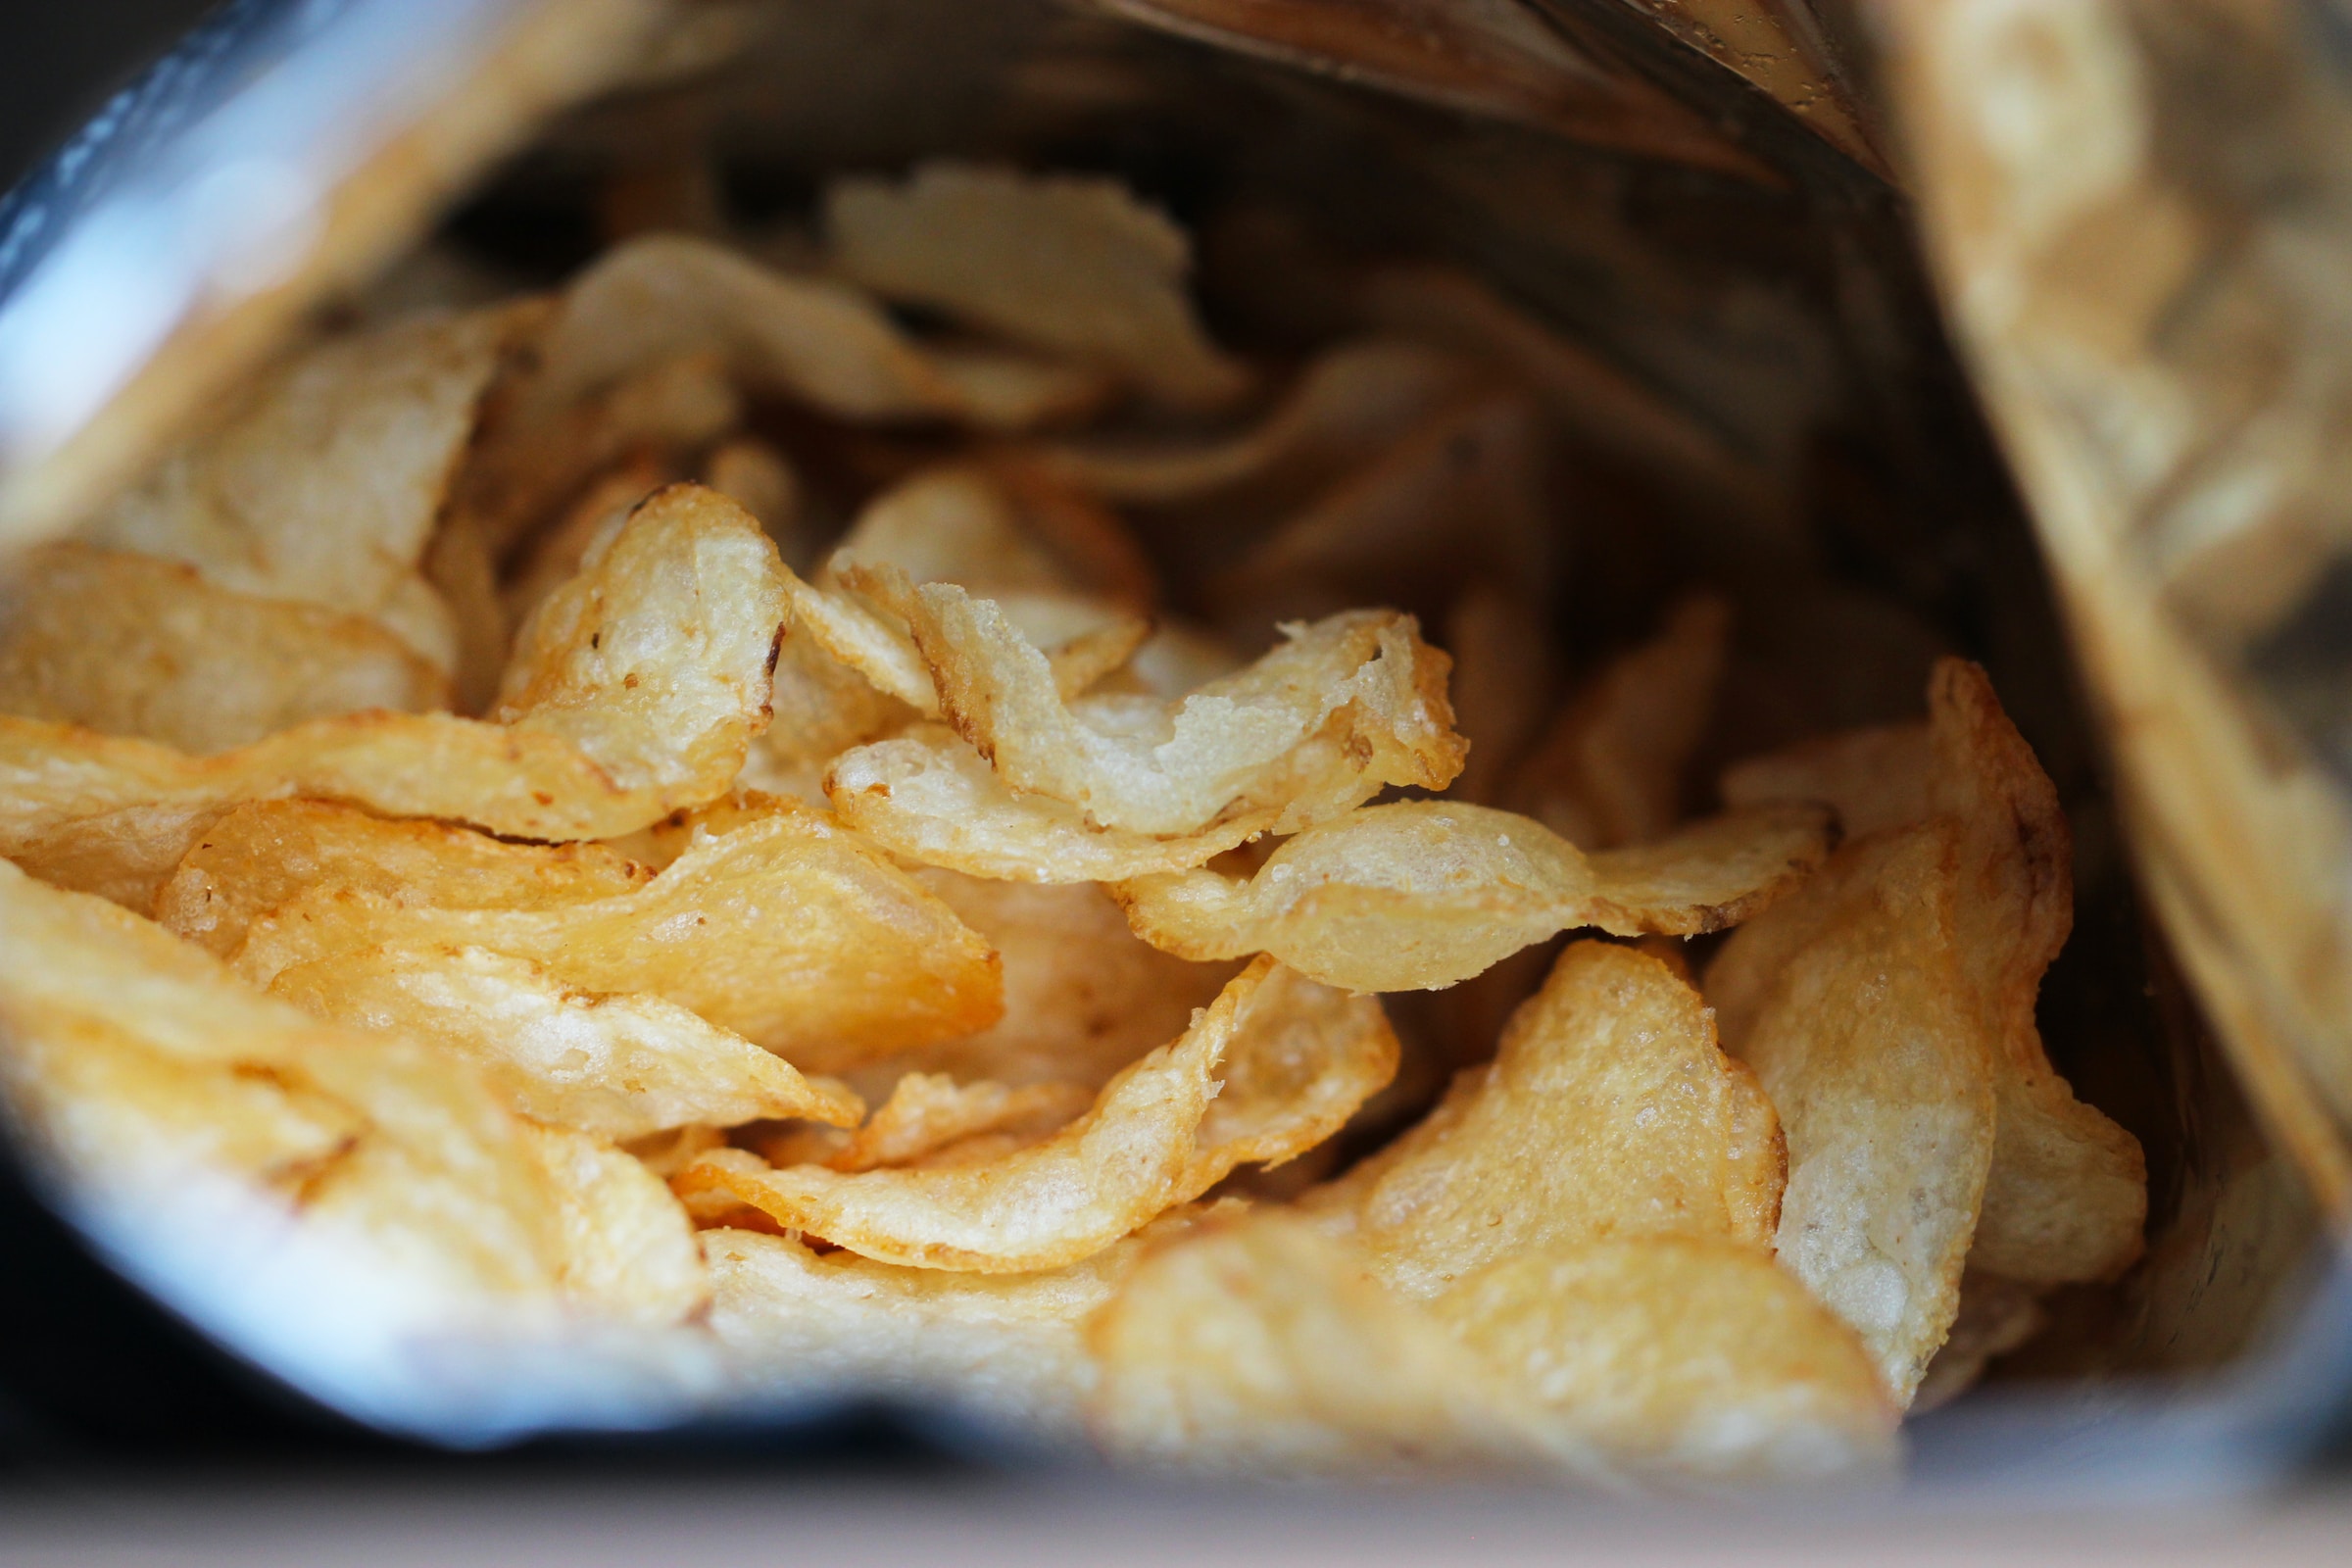 potato chips up close refined carbohydrates picture of up close bag